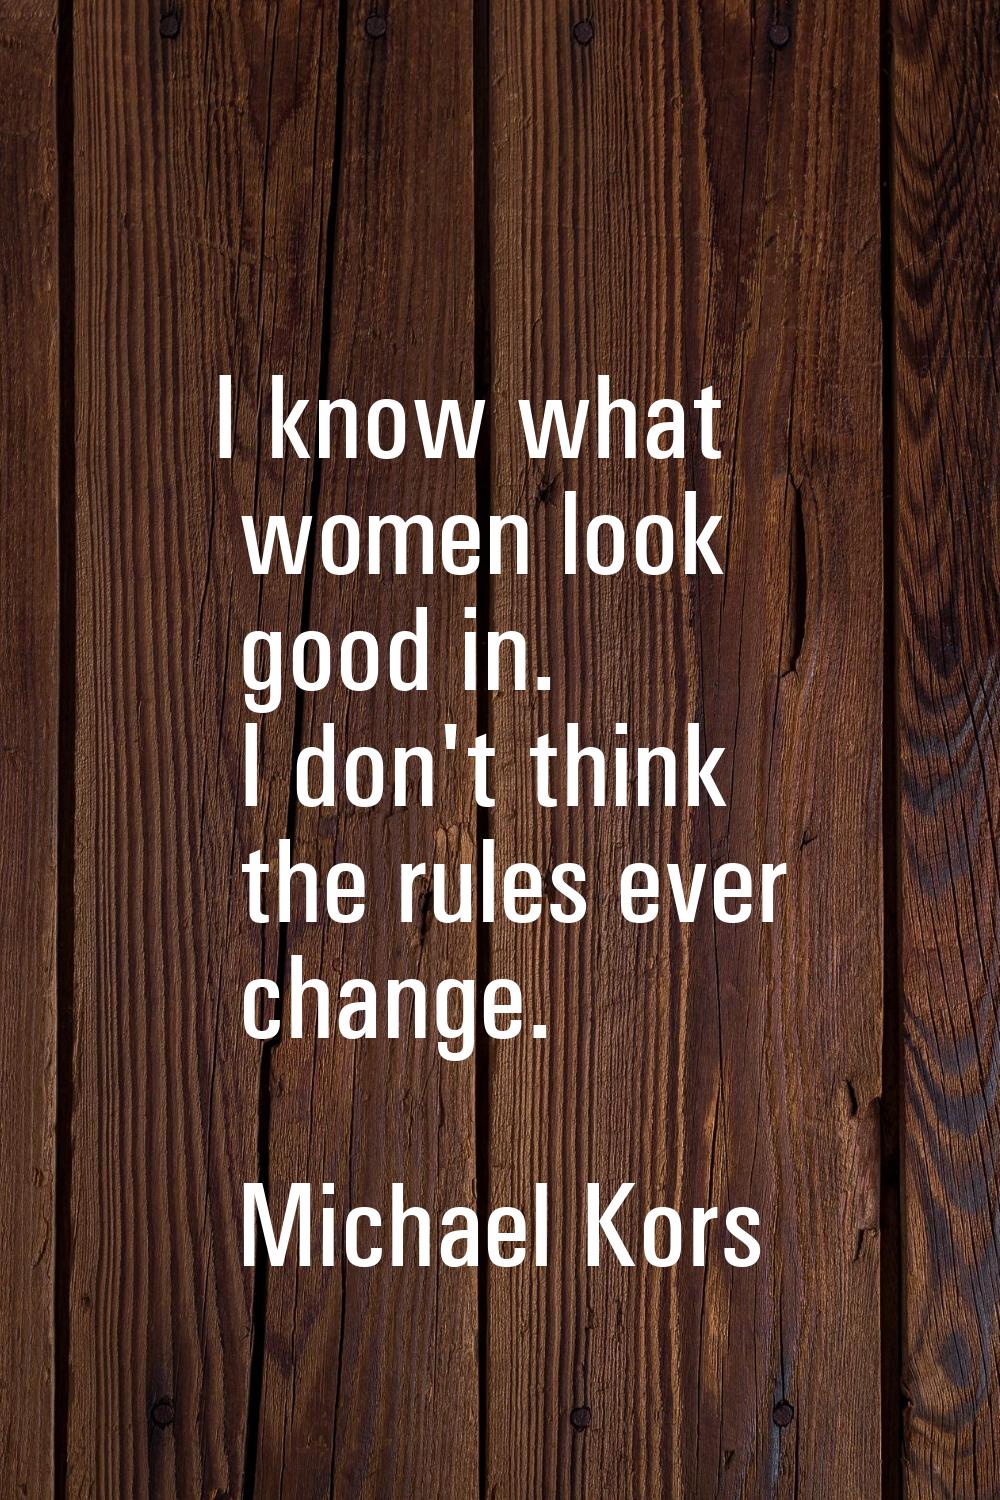 I know what women look good in. I don't think the rules ever change.